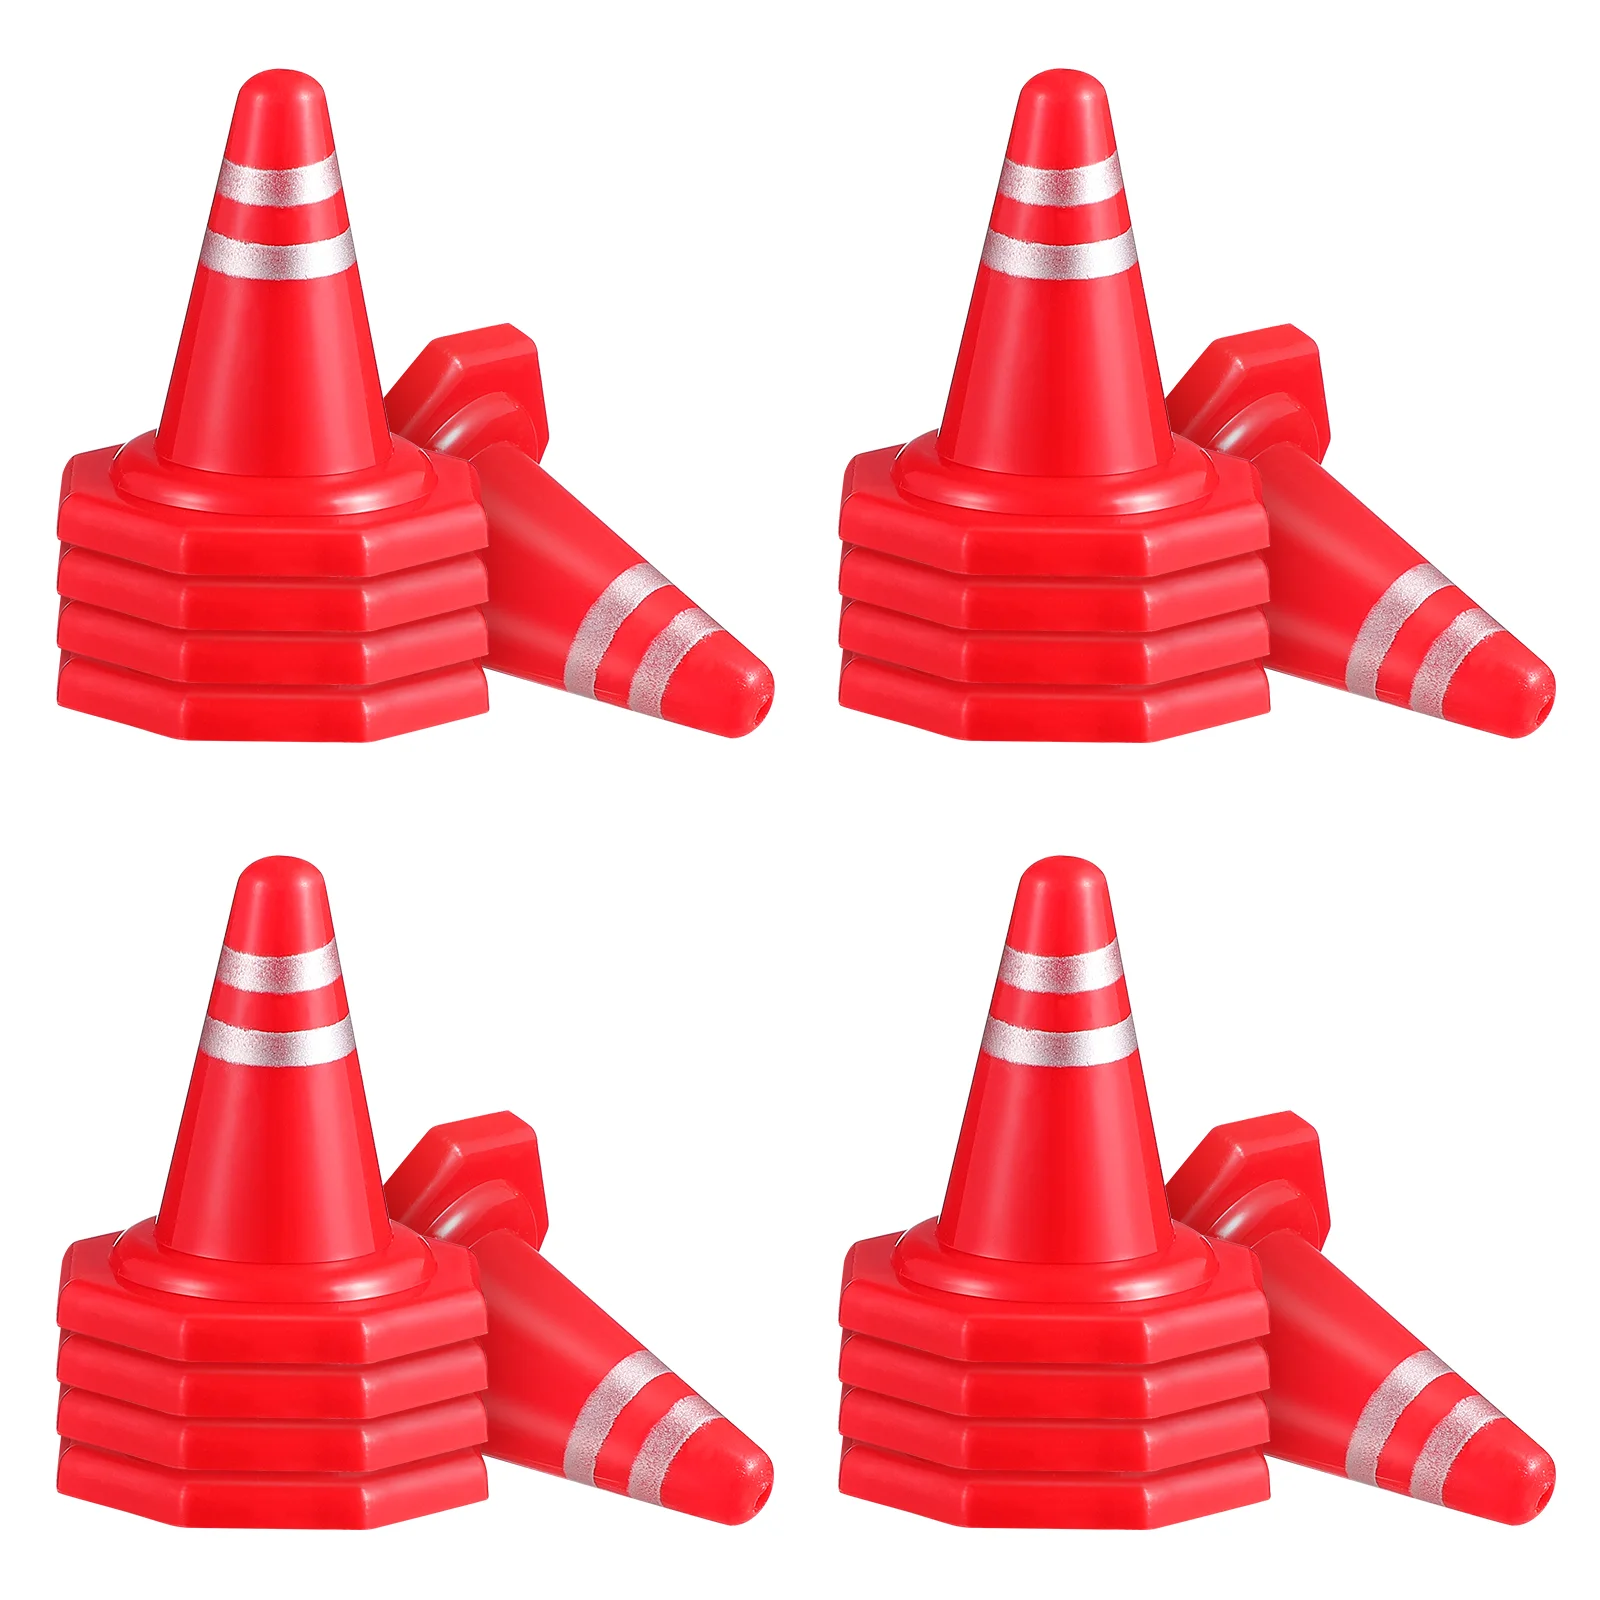 Sandbox Barricades Mini Roadblock Emblems Signs for Kids Children’s Childrens Toyss Transportation Puzzle Simulated Traffic simulated traffic barricades road sign toy miniature diy roadblock plastic early childhood toys